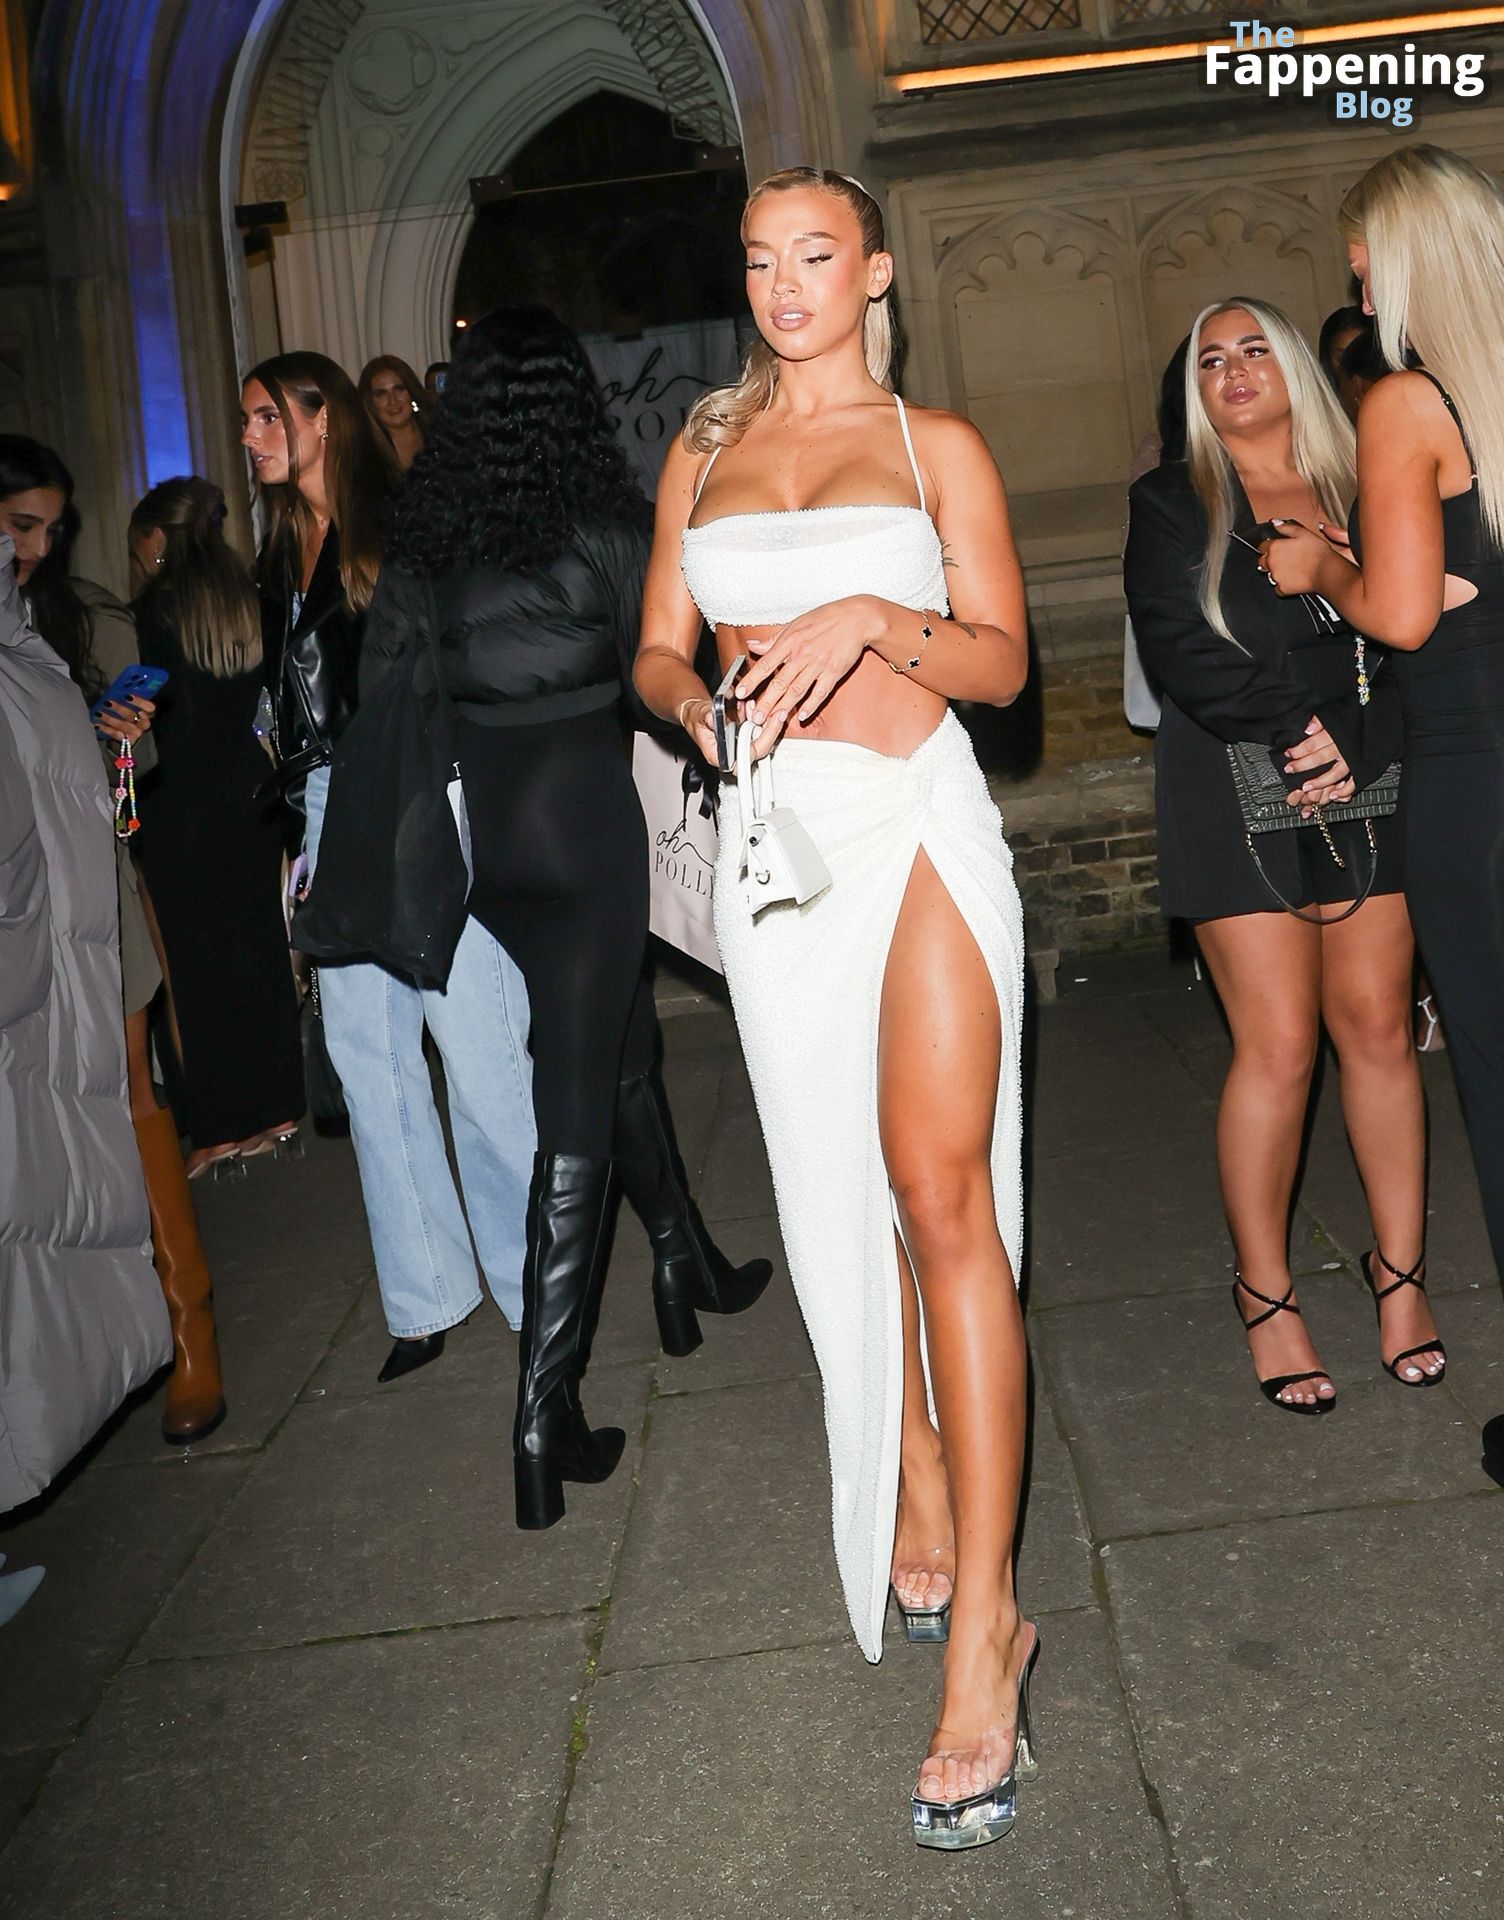 Tammy-Hembrow-Sexy-The-Fappening-Blog-20.jpg